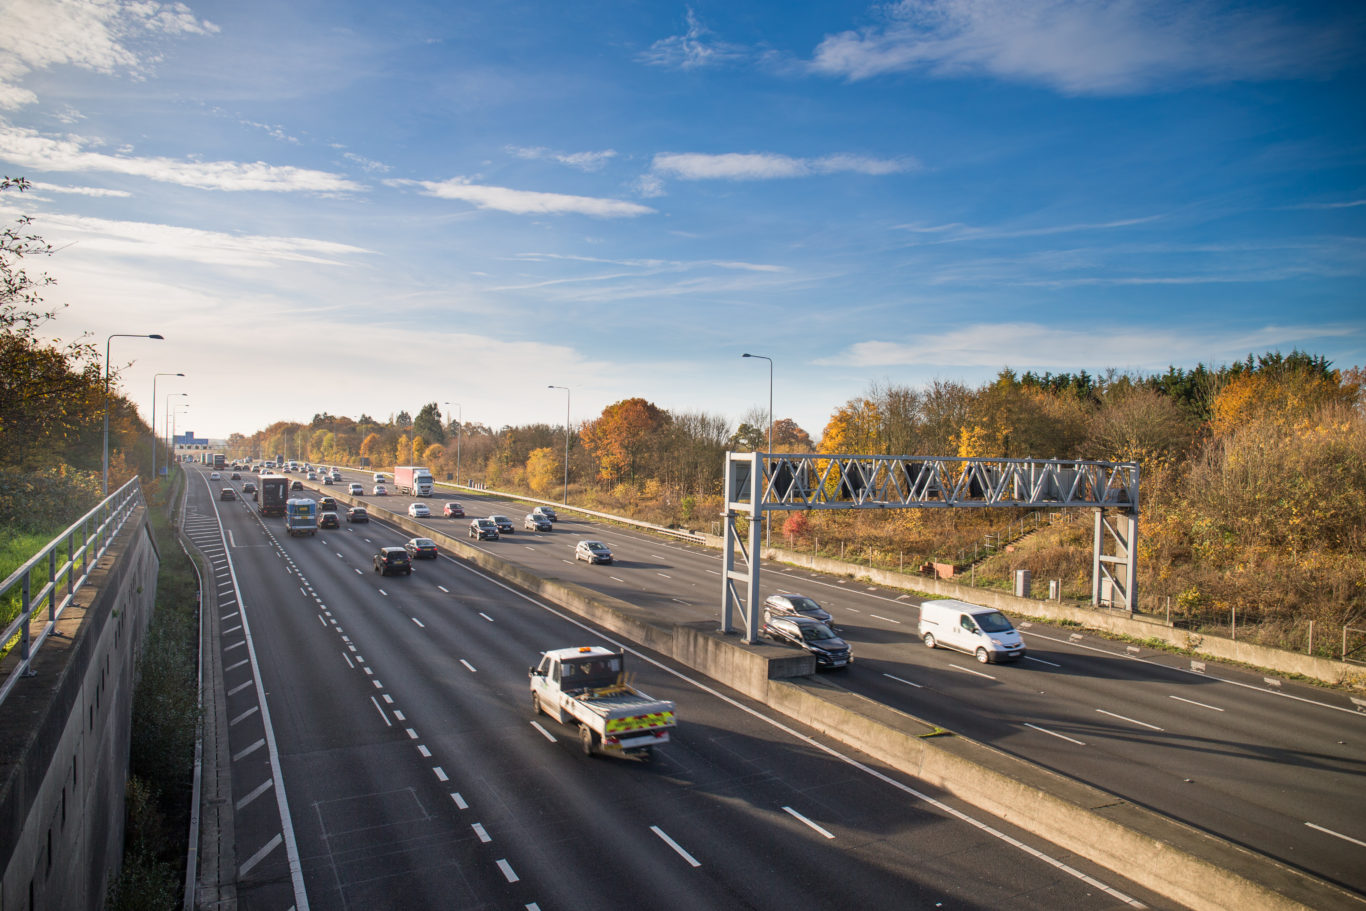 Smart motorways aim to improve congestion and traffic flow